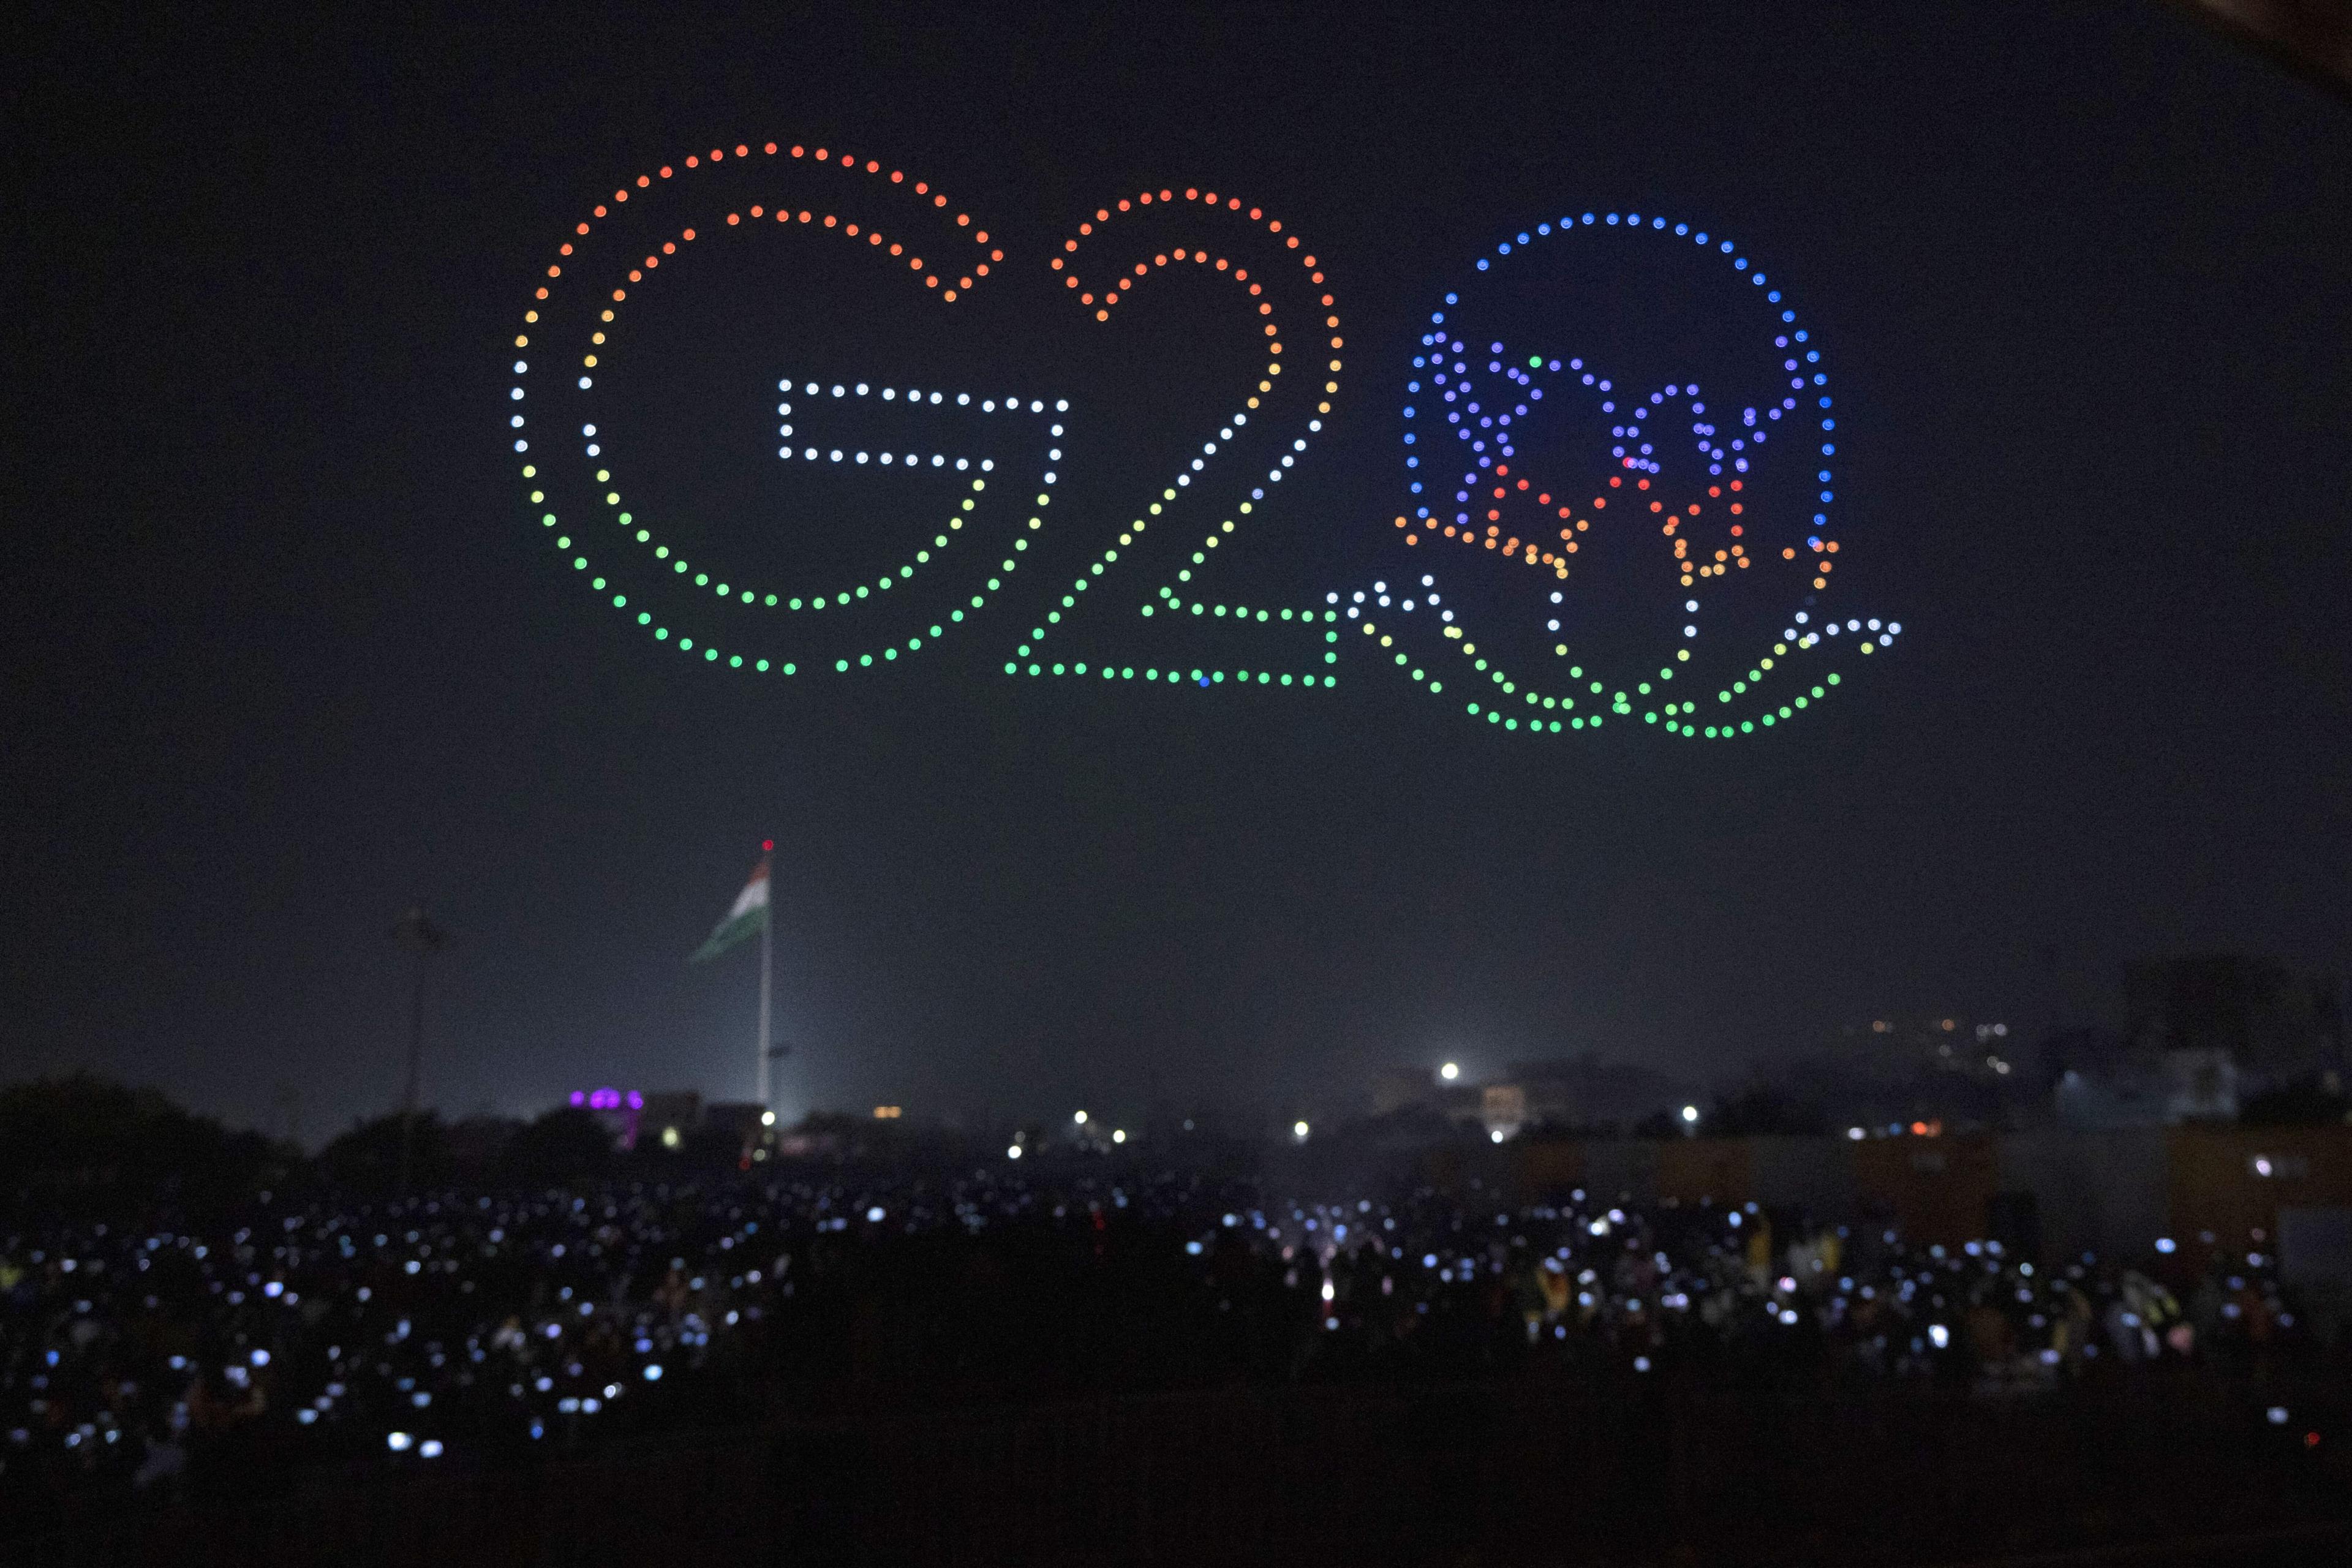 Several drones fly in formation to create an image of G20 symbol to mark India's presidency of G20 during an event in Gorakhpur, India, Monday, Dec. 19, 2022. (AP Photo/ Rajesh Kumar Singh)